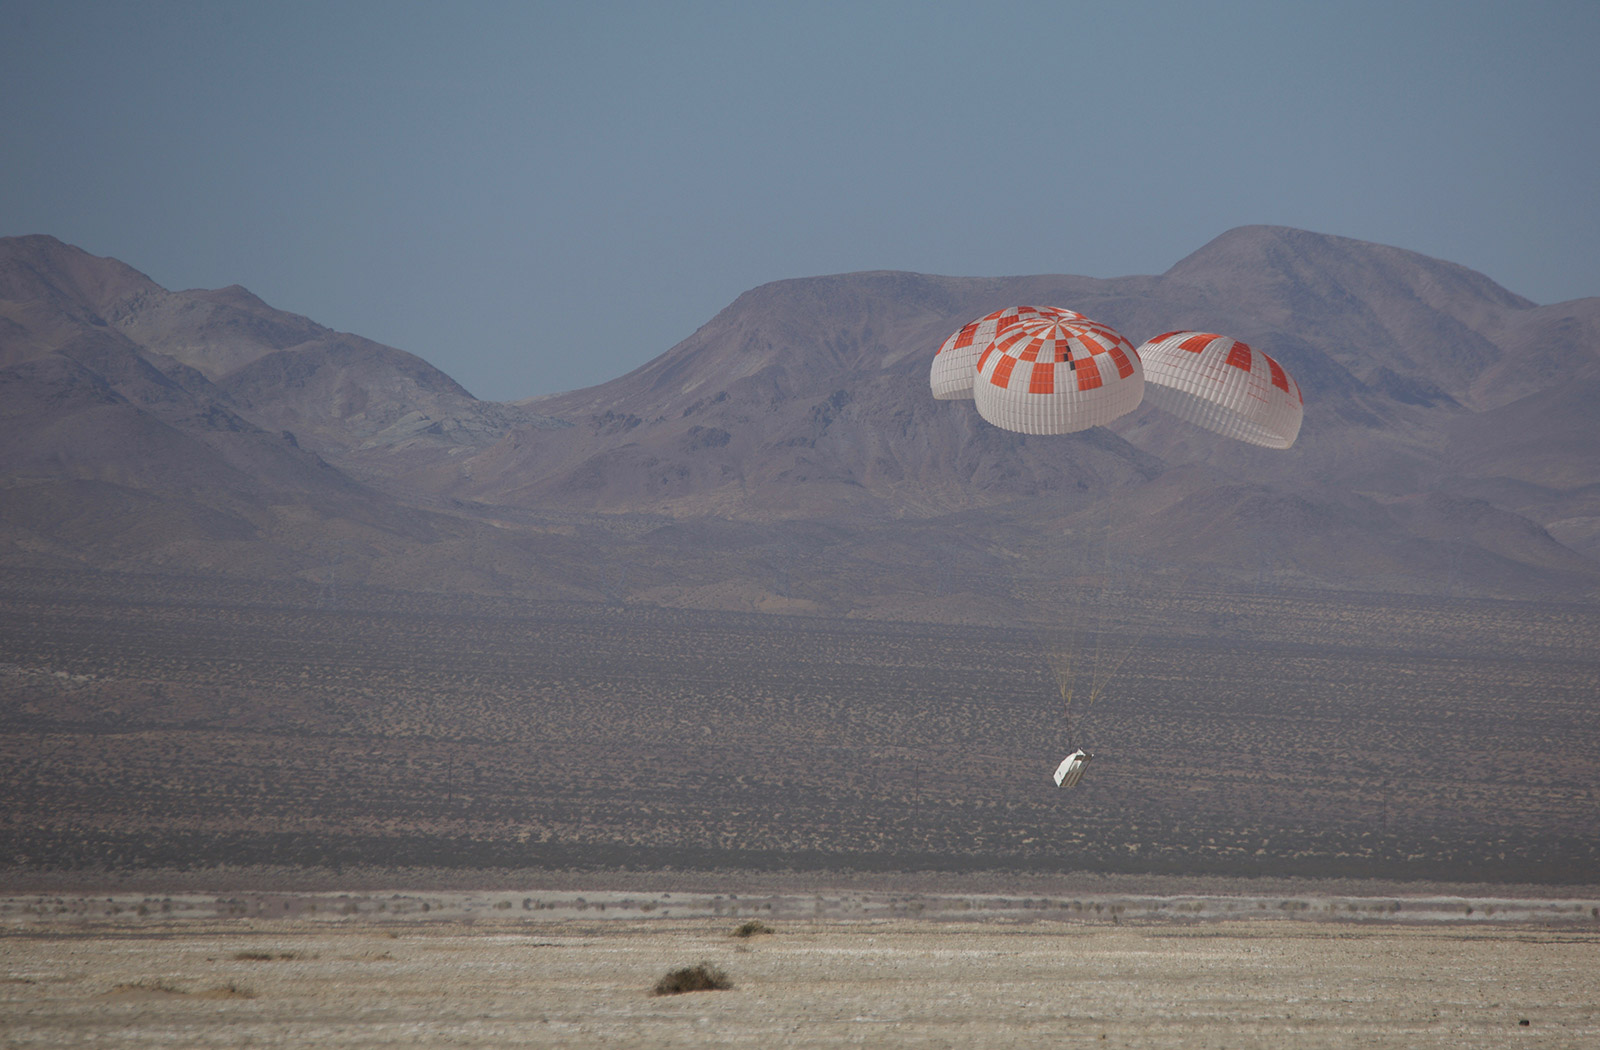 Parachute system tests.